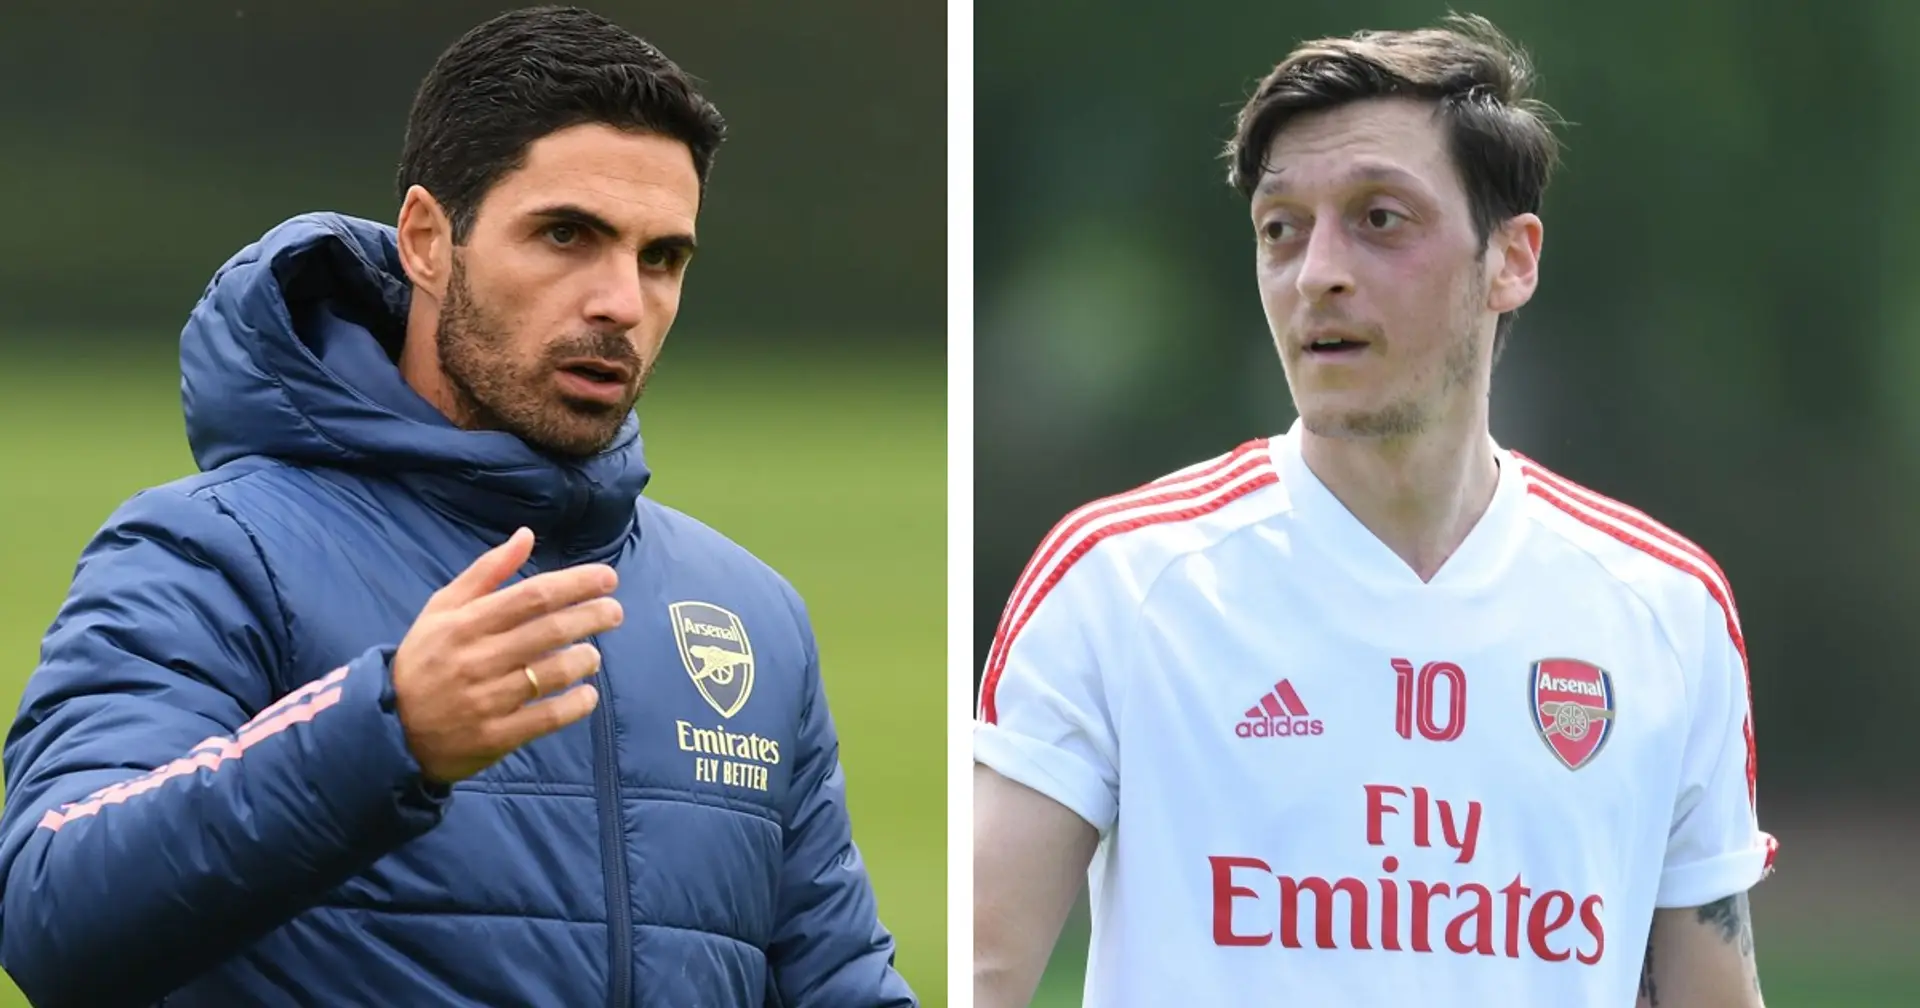 Mikel Arteta denies suggestions that Ozil decision was caused by outside influence on him